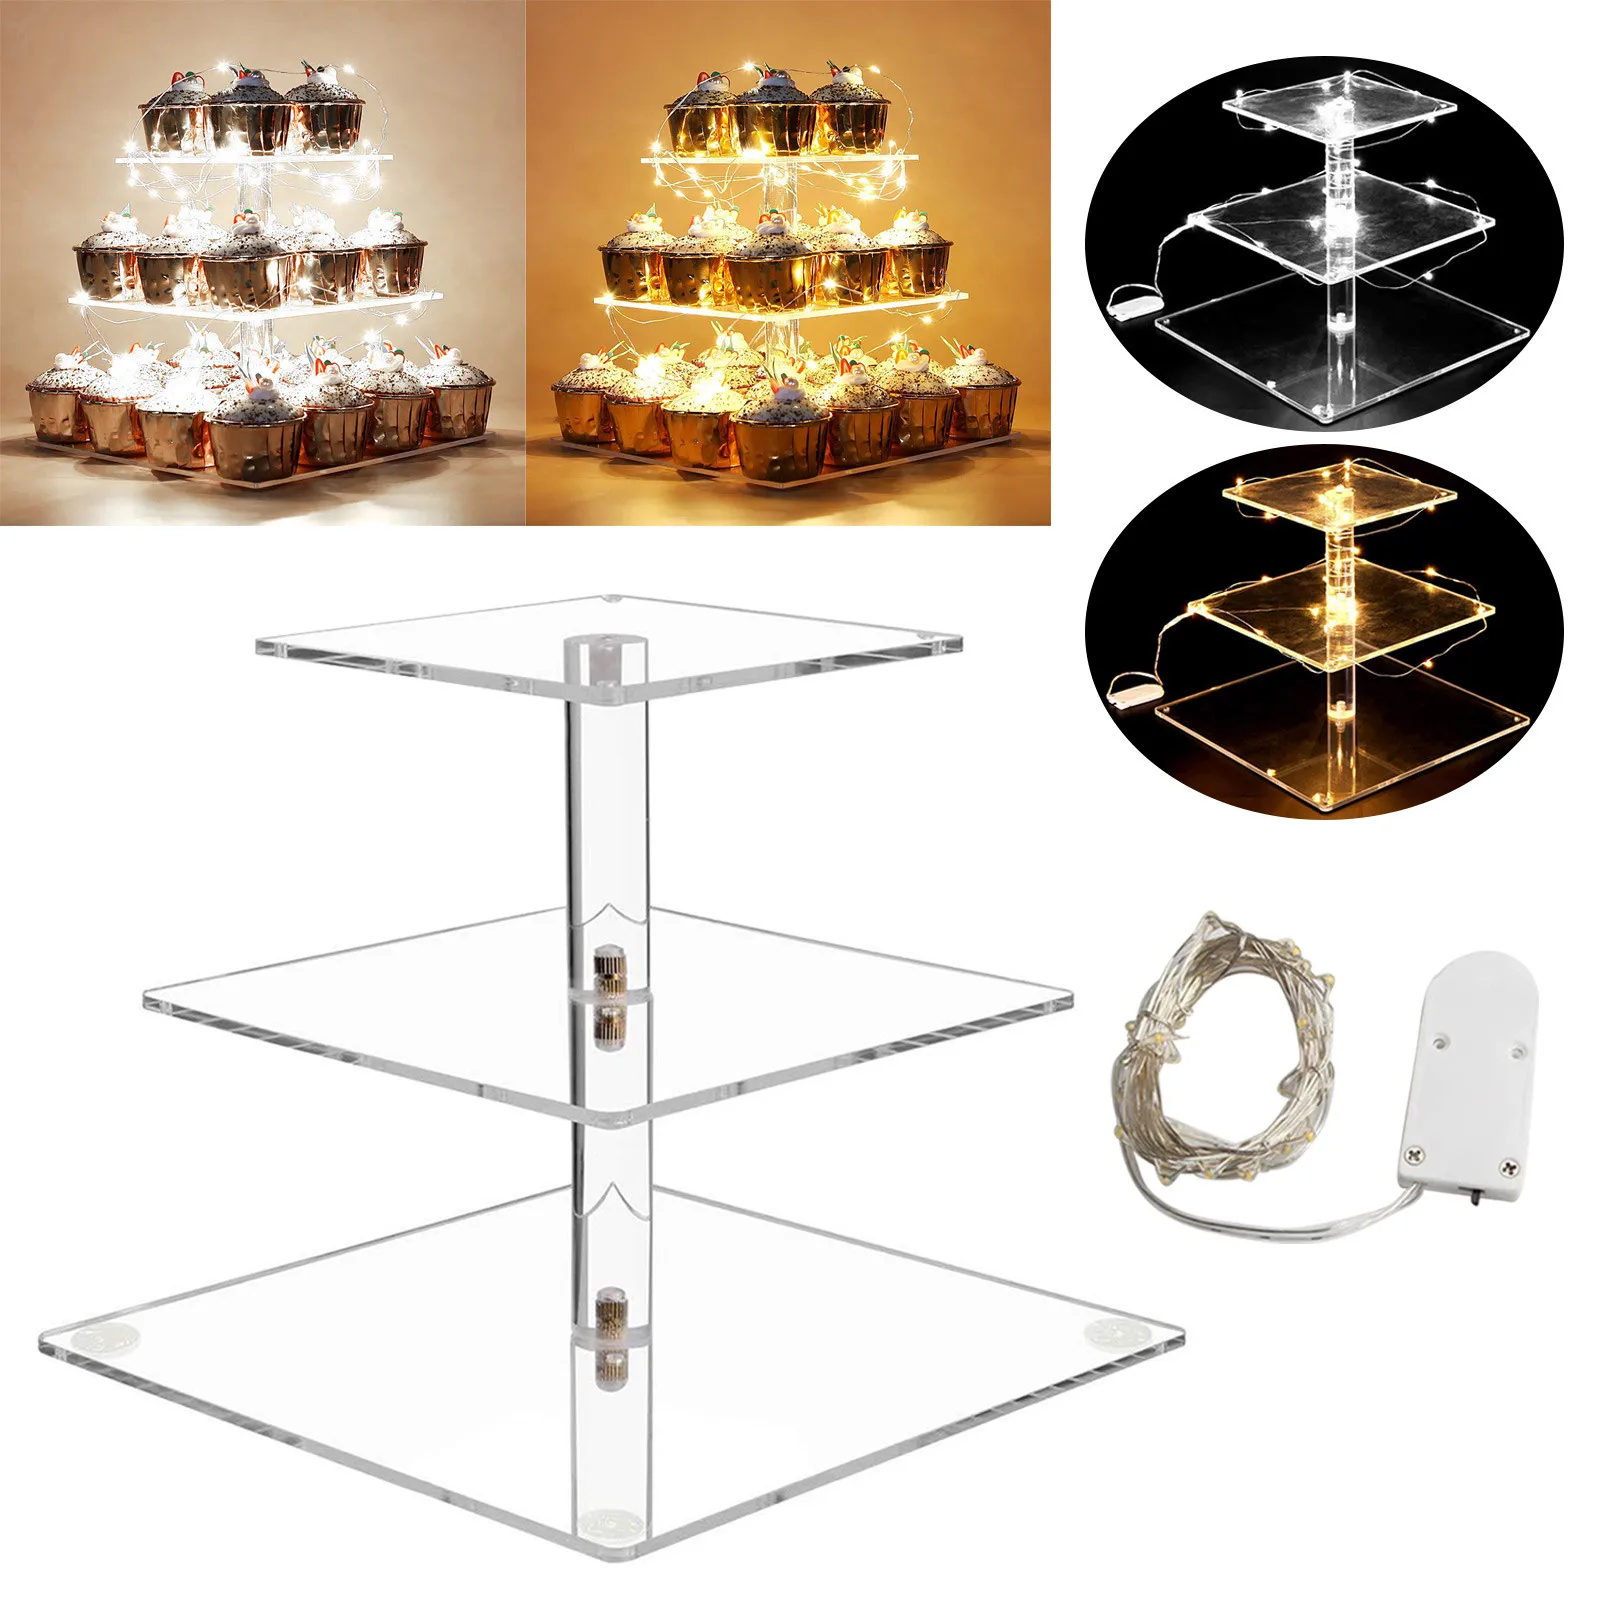 

3 Tier Transparent Acrylic Cake Dessert Display Stand For Party Tower Cupcake Holder Bakeware Wedding Birthday Party Decor G3